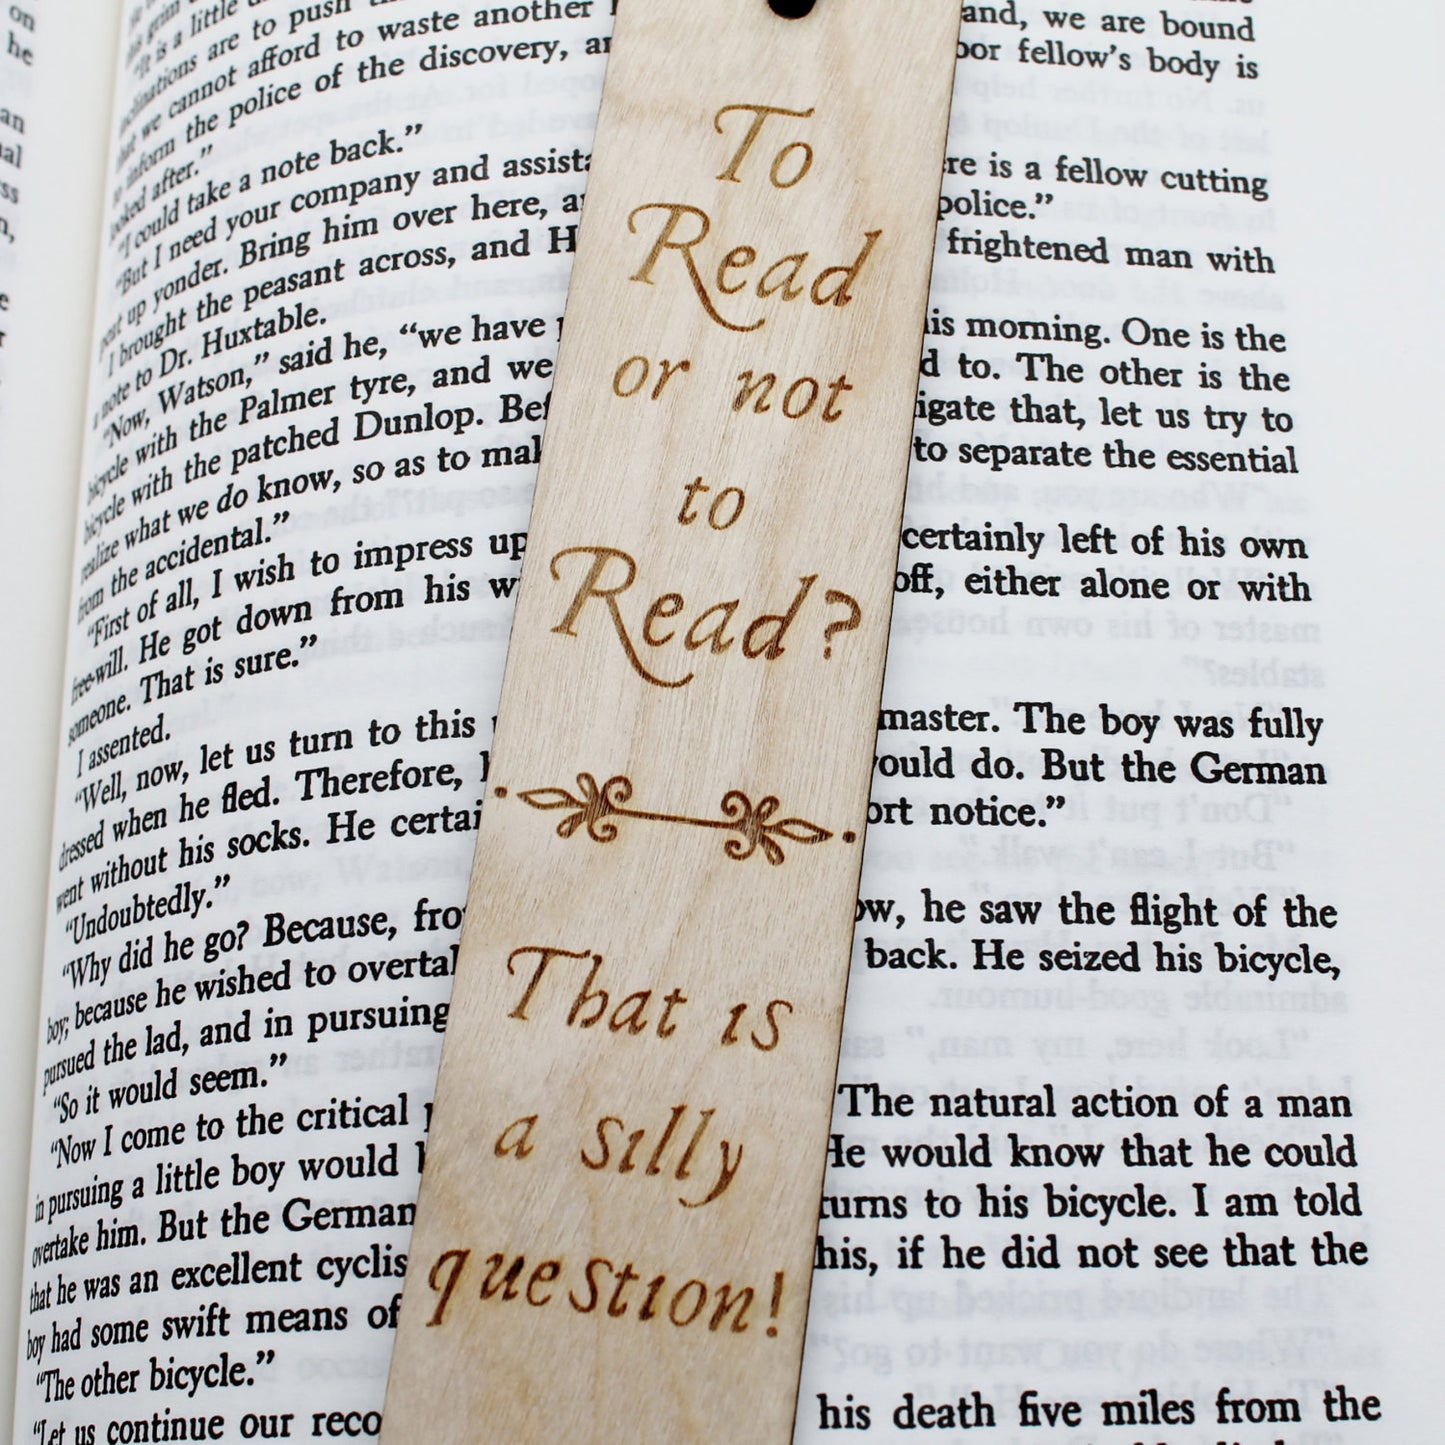 To Read or Not To Read? That is a Silly Question - Wooden Bookmark